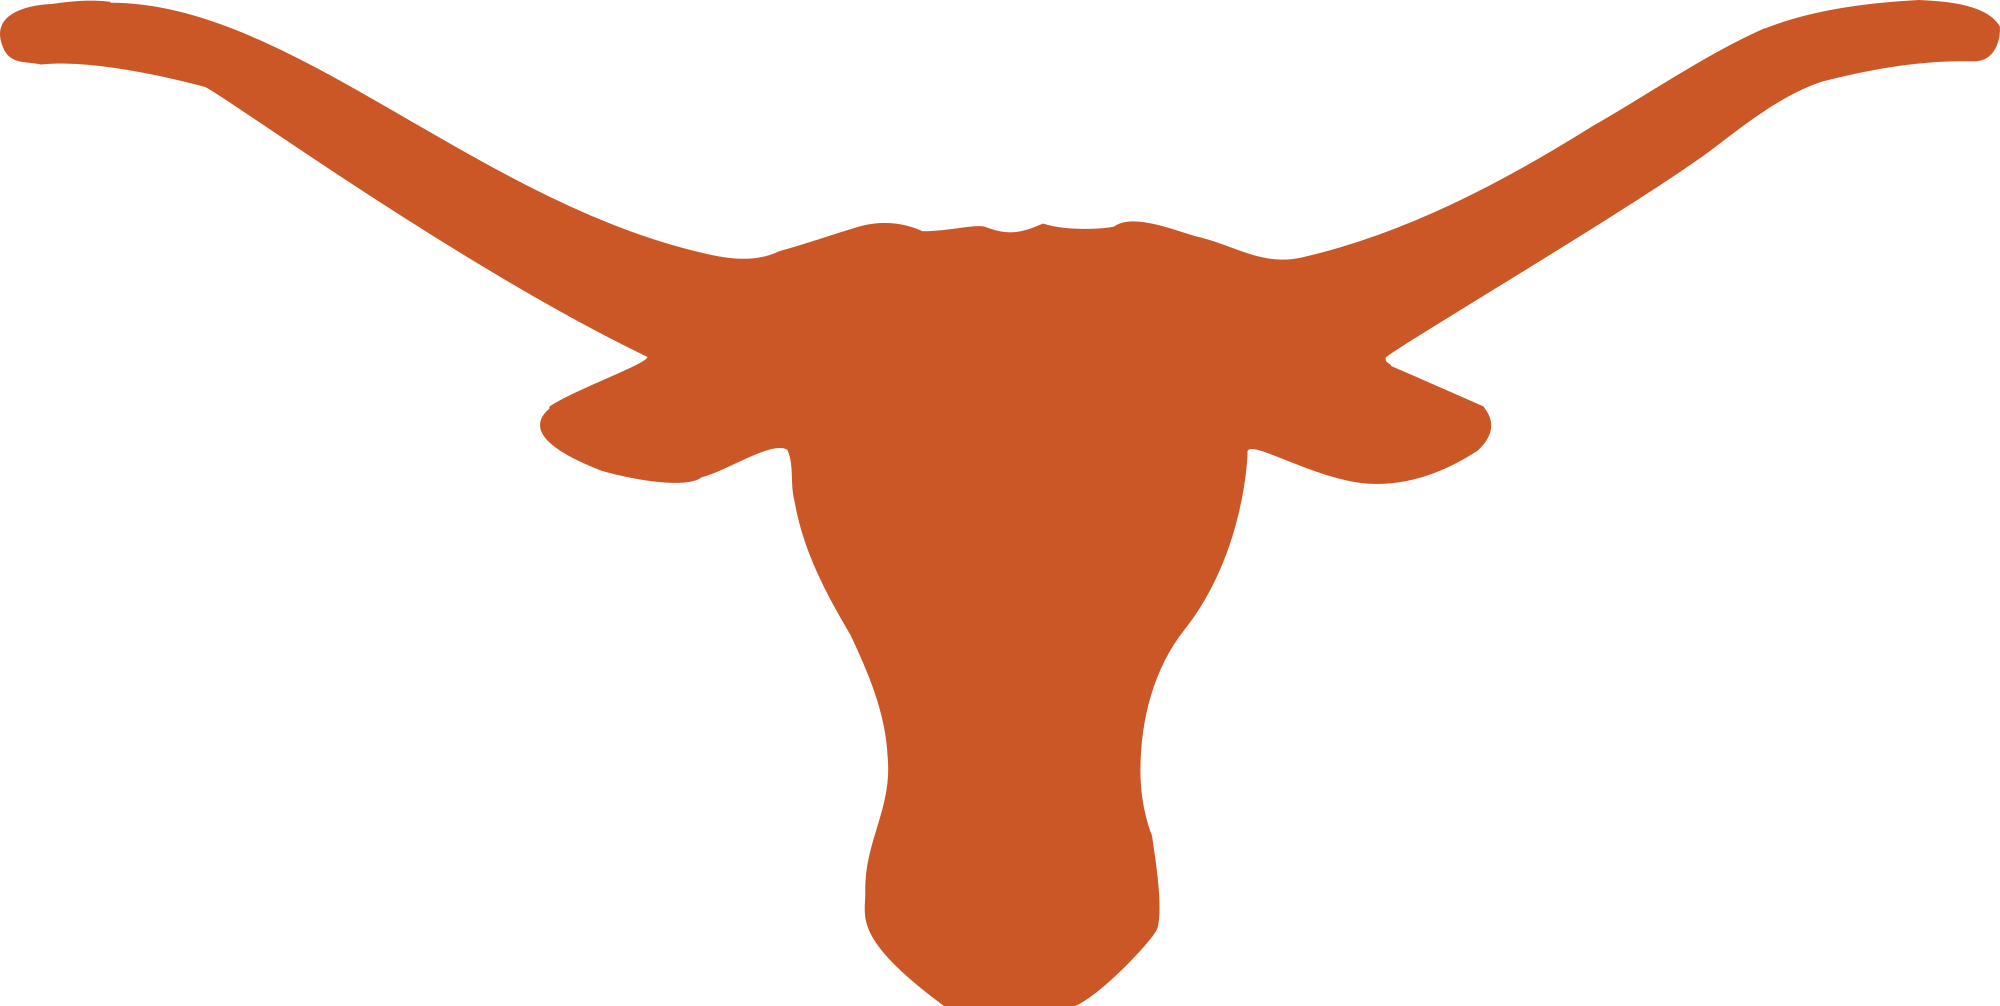 Univ  Of Texas  What Is A Good Gmat Score To Get Into Univ  Of Texas